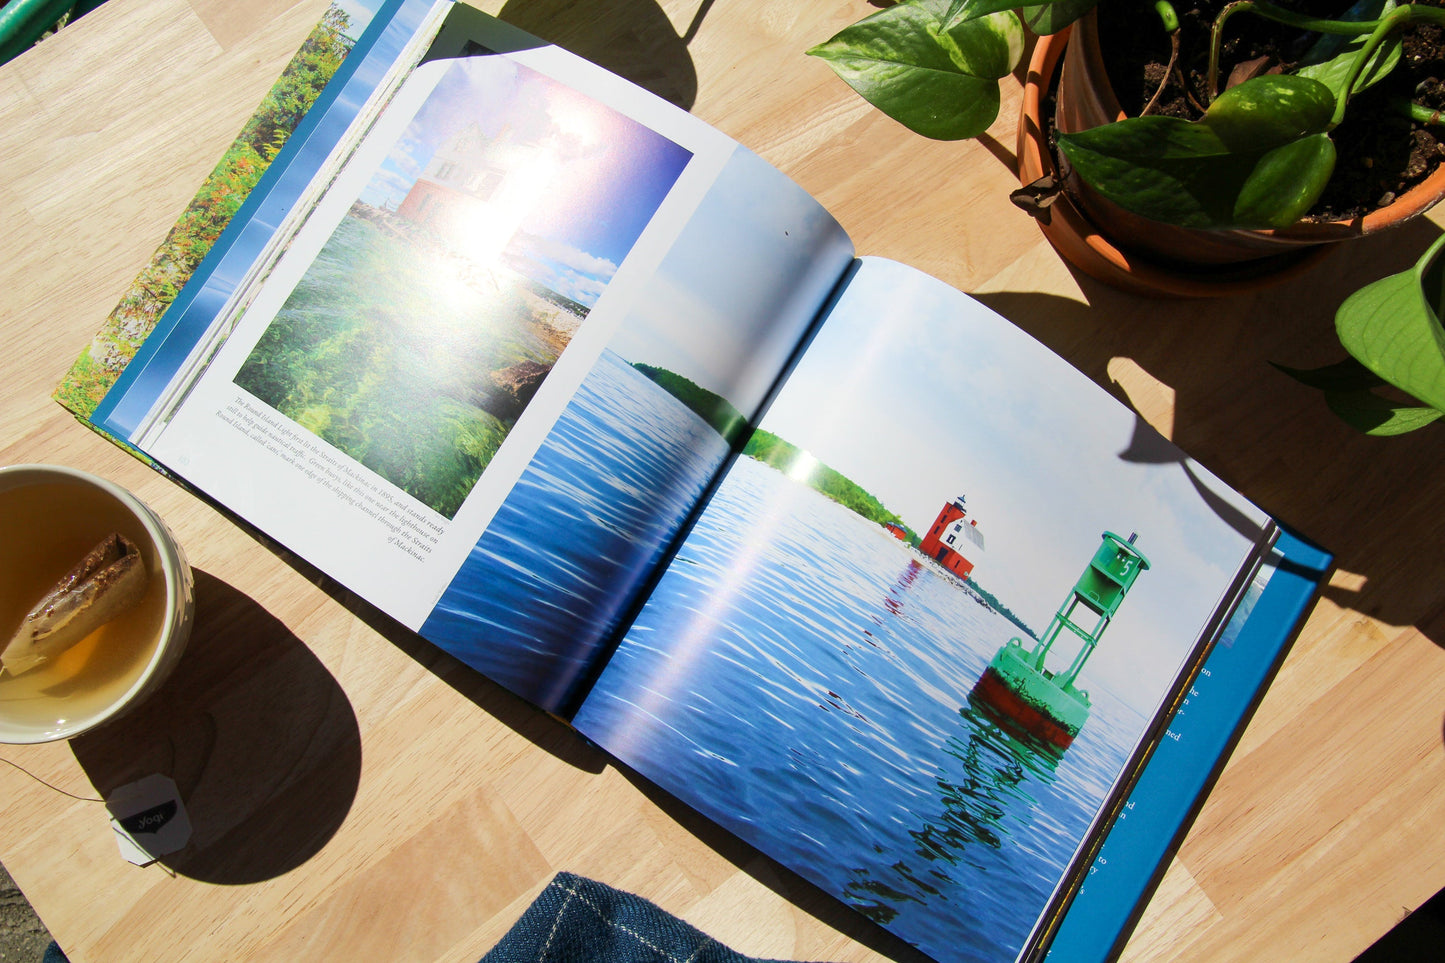 Four Seasons of Mackinac coffee table book by Jennifer Wohletz & Glen Young. Published by Mackinac Memories 184-pages, hard cover with a dust jacket.  A photoessay by Jennifer Wohletz with text by Glen Young.   Contributing photographers include:  Jennifer Wohletz, Mark Bearss, Kara Beth Nicholson, Mark Sawatzki, Jimmy Taylor, Katharine Rose Witt and Sara Wright.